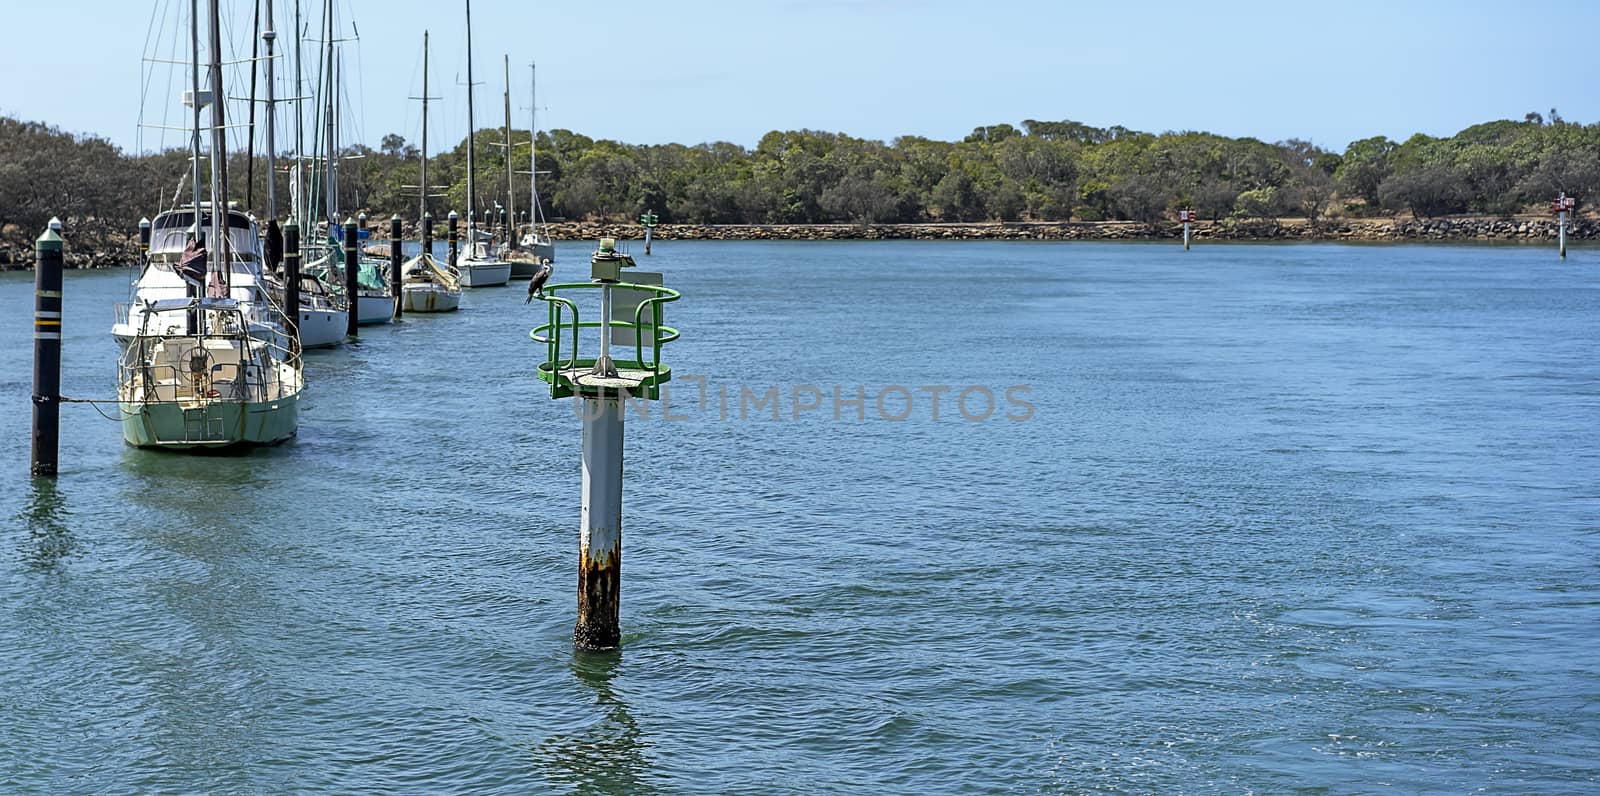 Mooloolah River with green starboard channel marker showing navigable water and moored yachts and boats